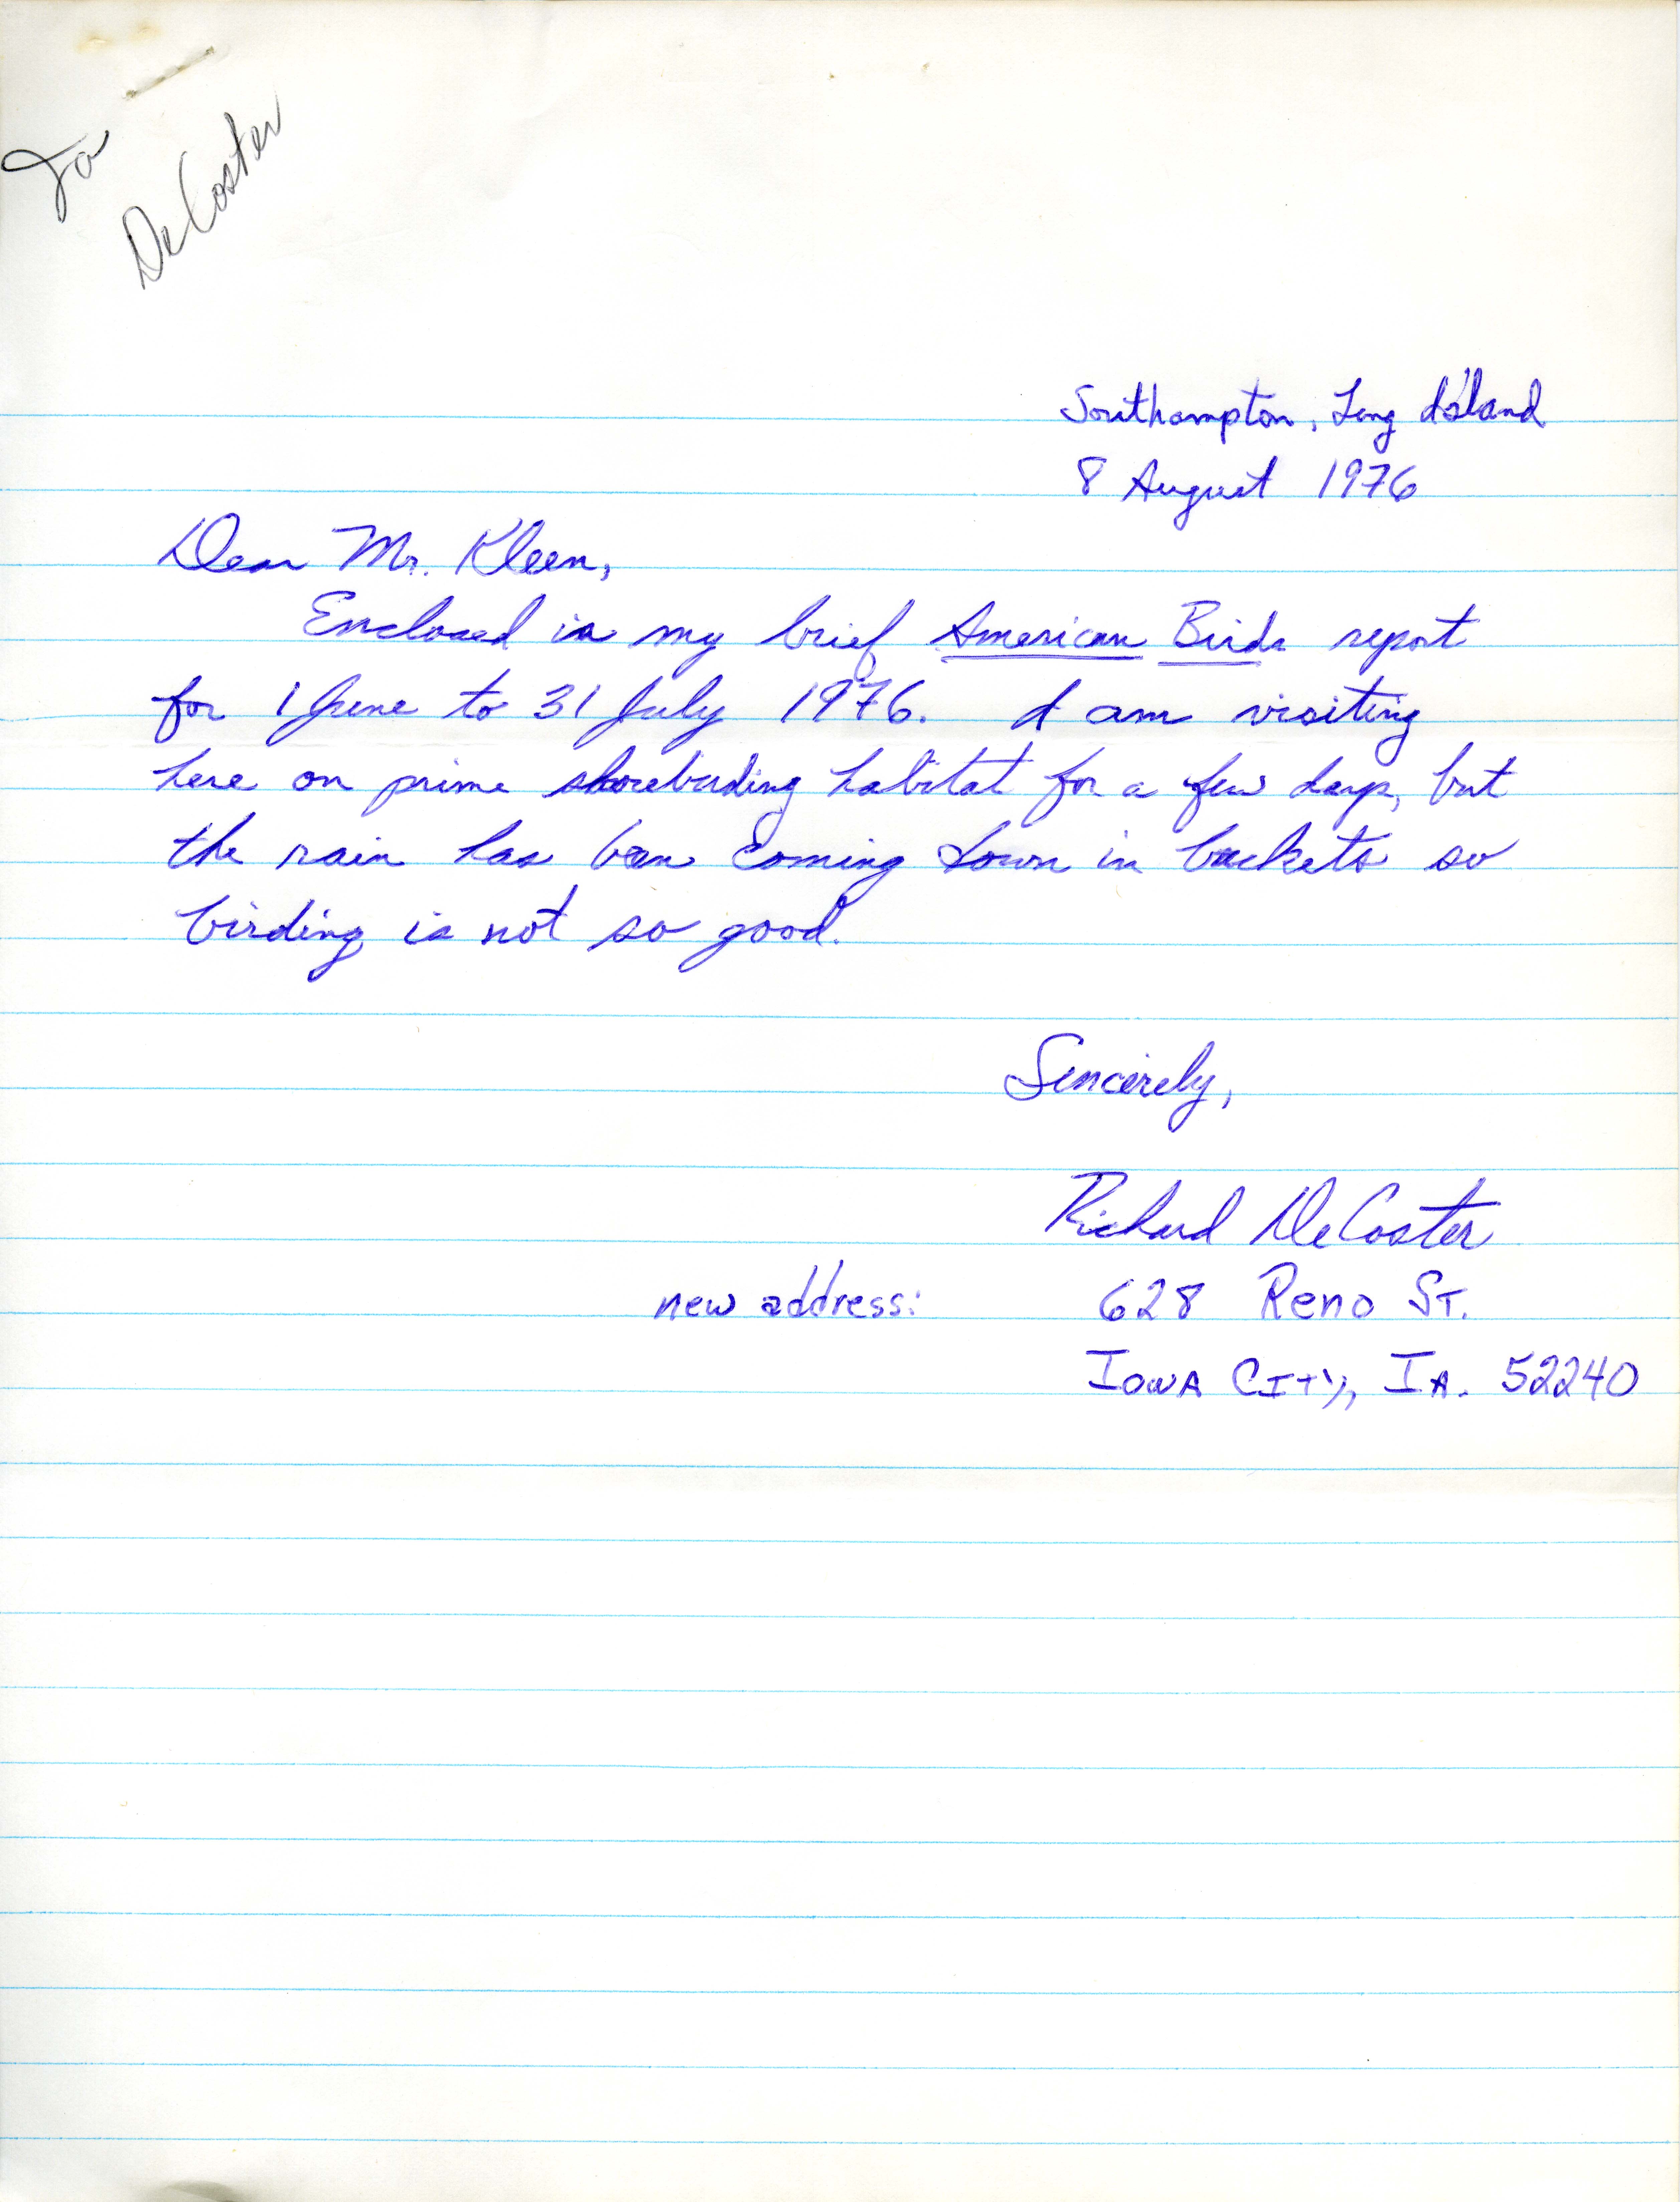 Letter from Richard DeCoster to Iowa Ornithologists' Union regarding bird sightings from June 1 to July 31, 1976